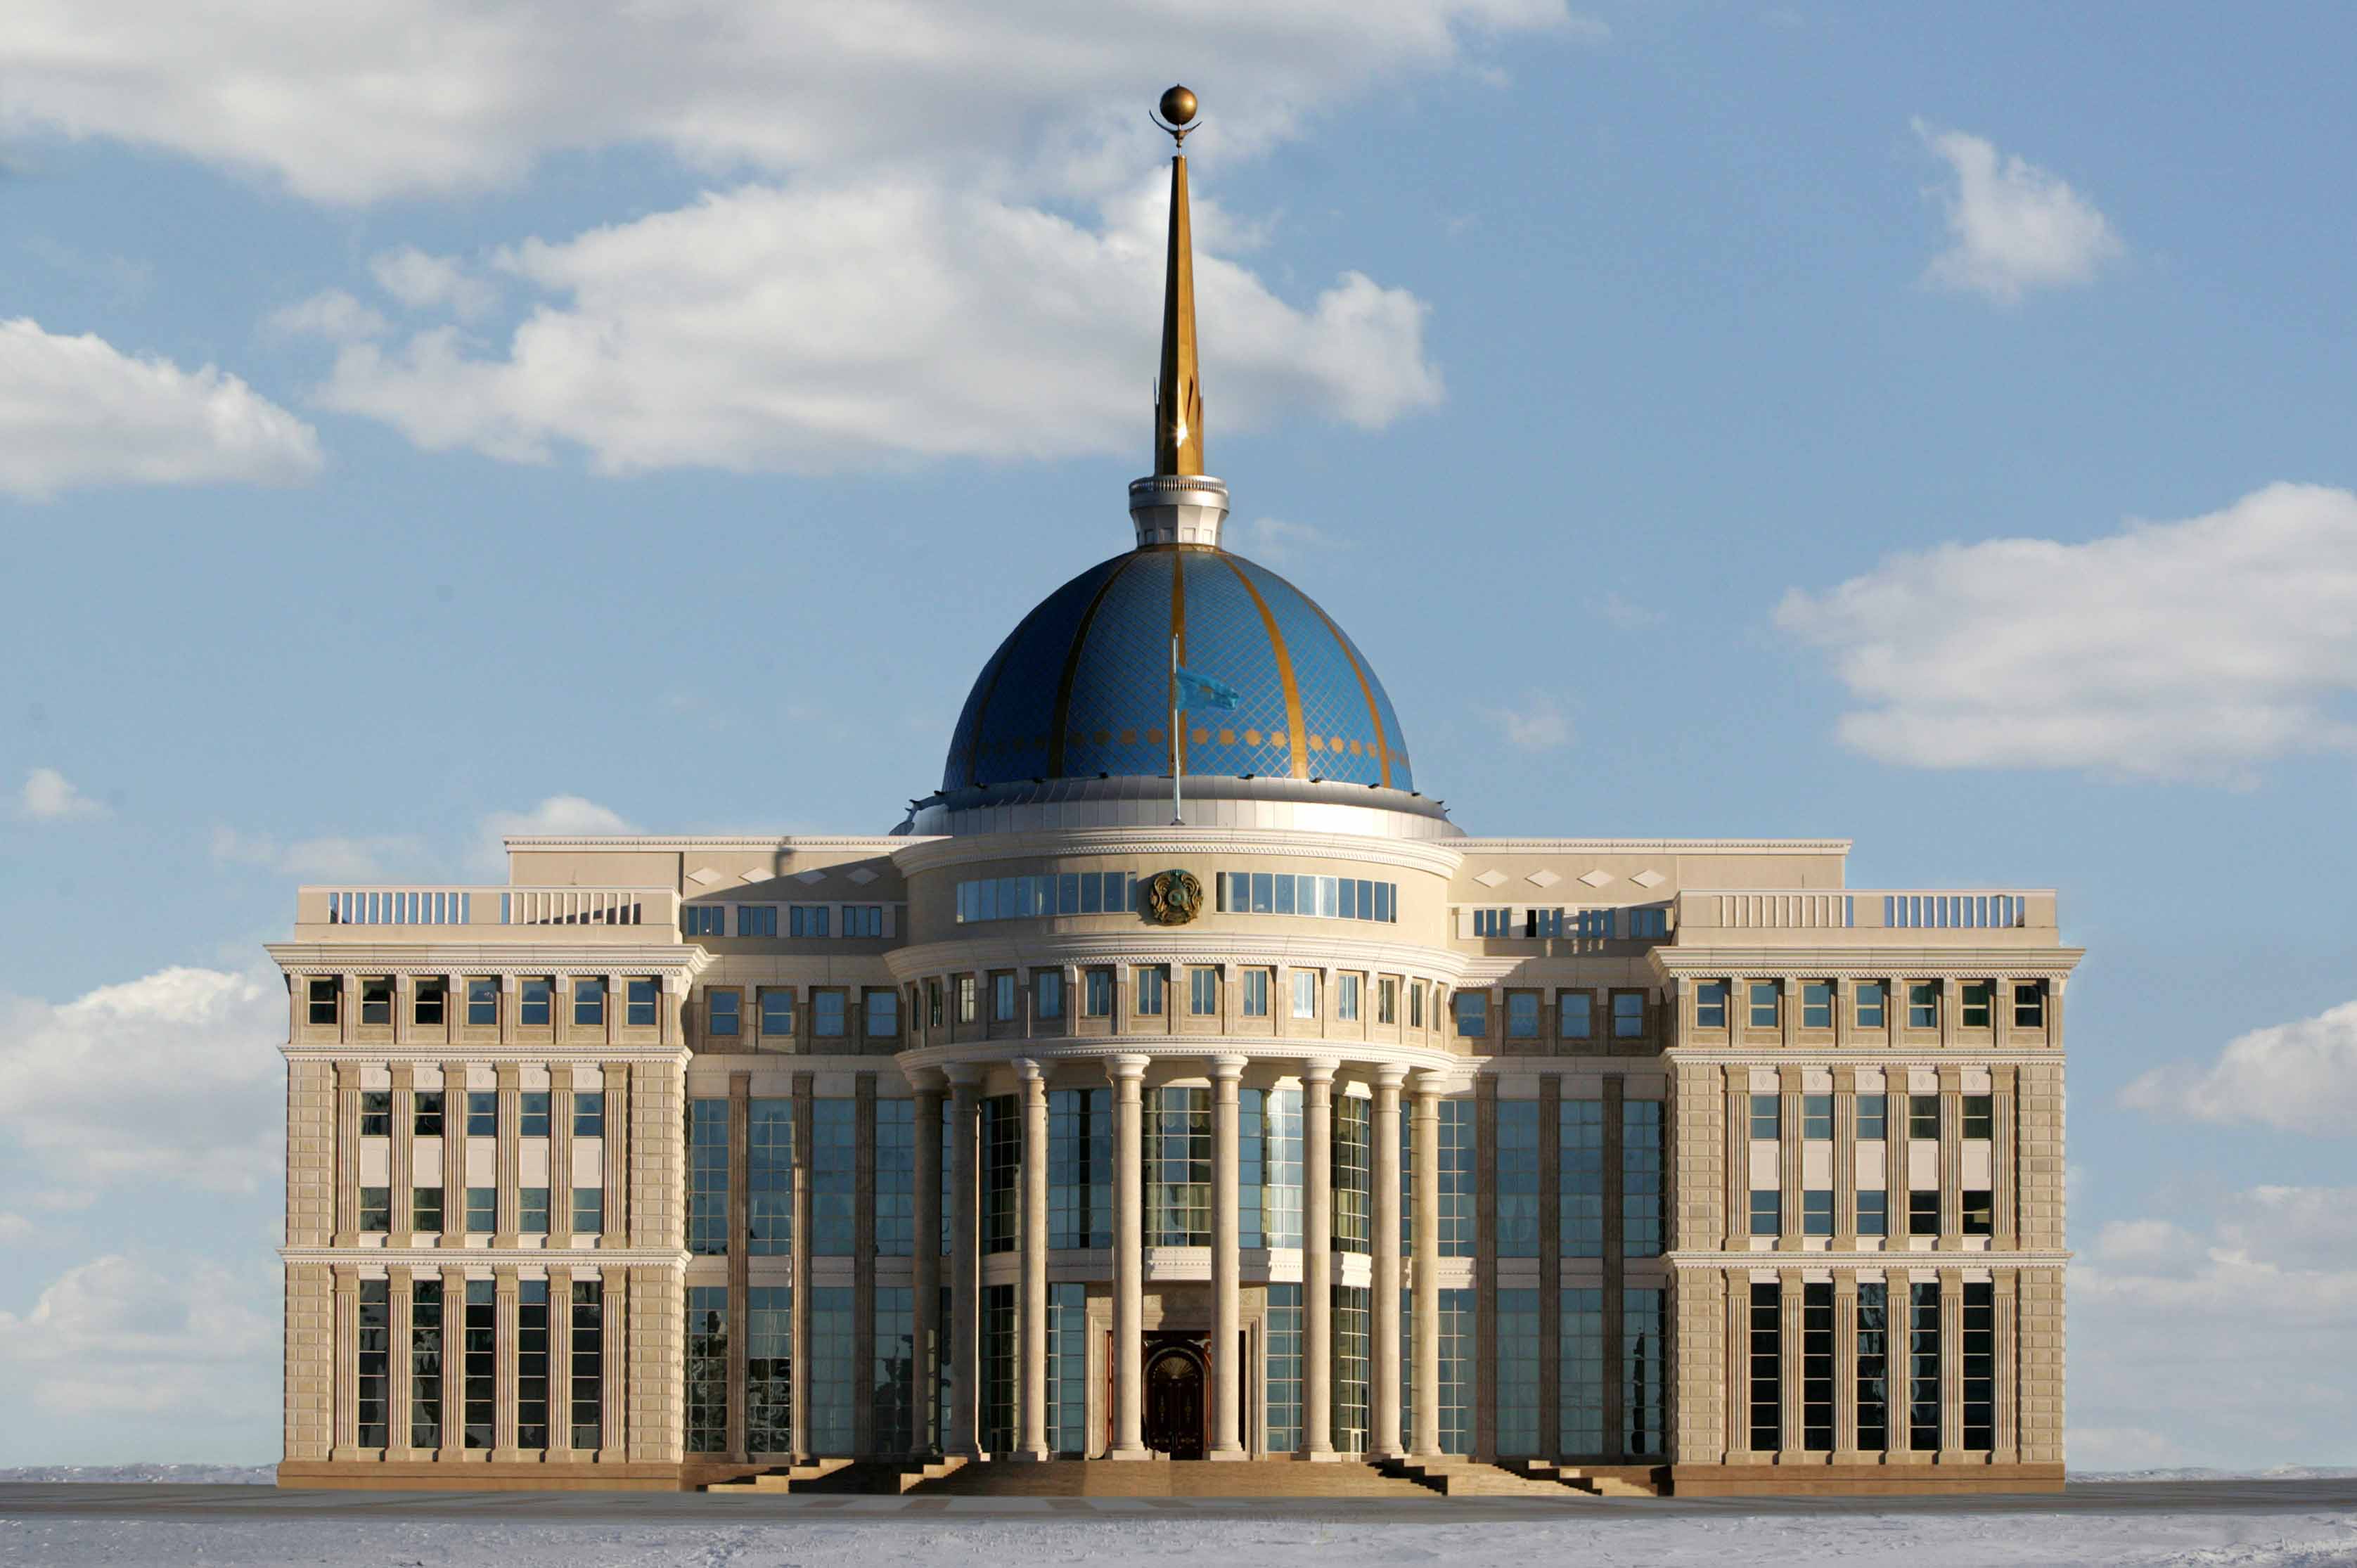 Kazakh President send a telegram of condolence to President of the Russian Federation